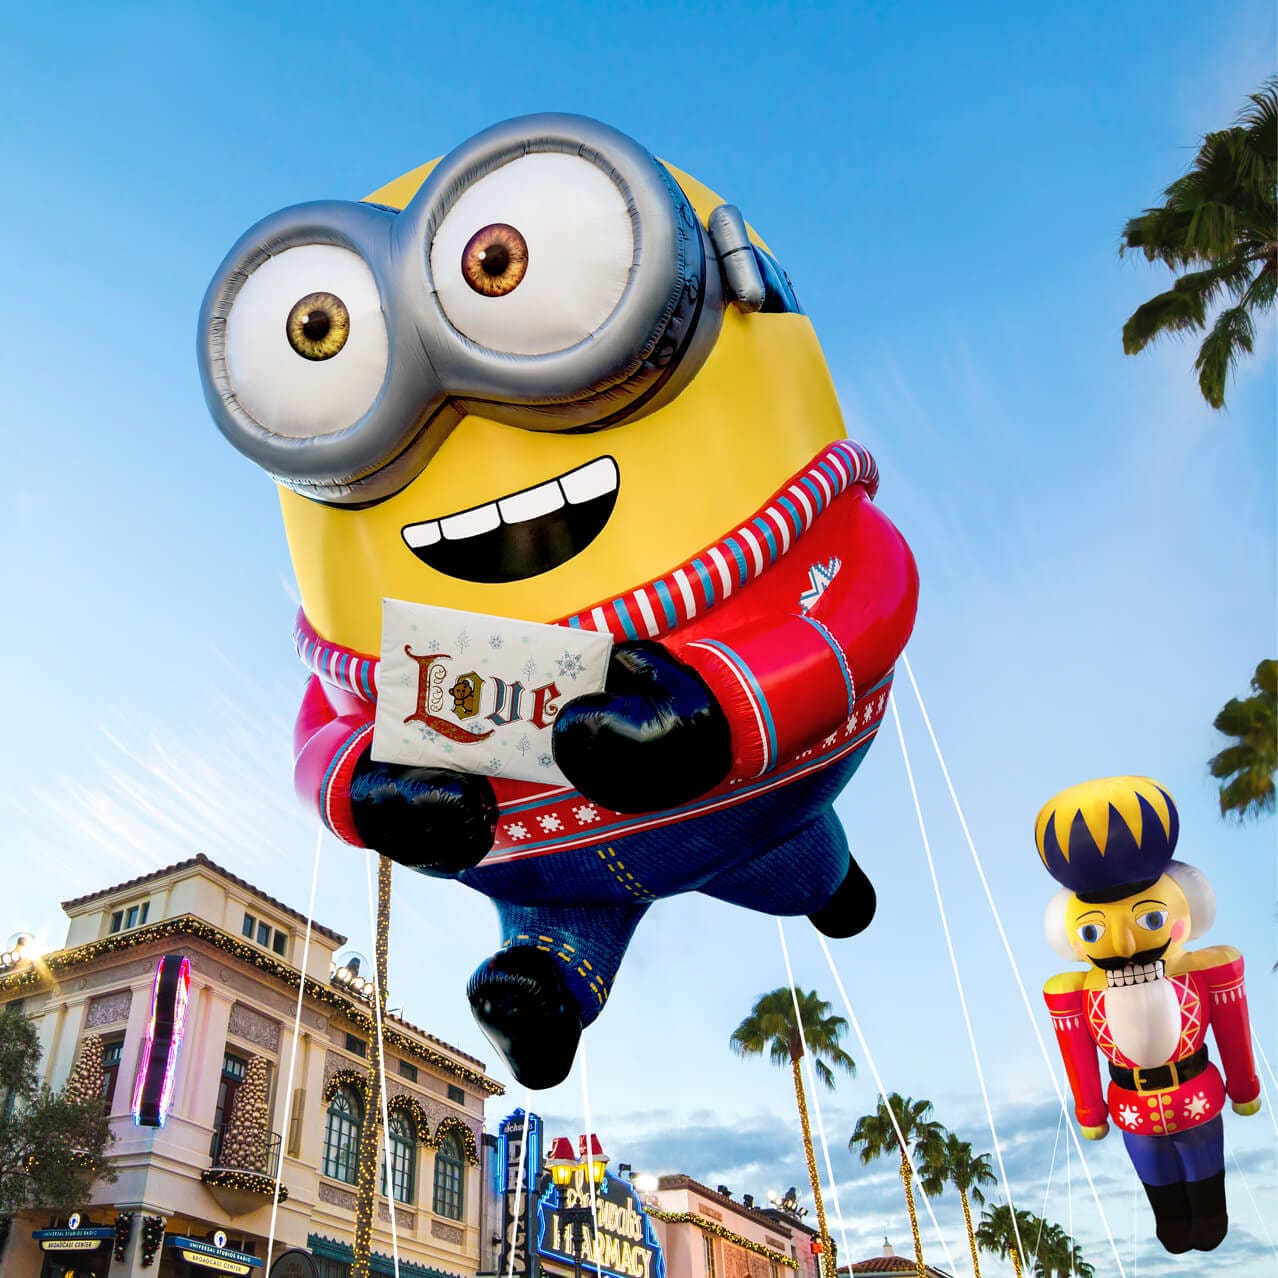 A Minion balloon hovers over Hollywood in the Macy’s Holiday Parade at Universal Studios Florida.